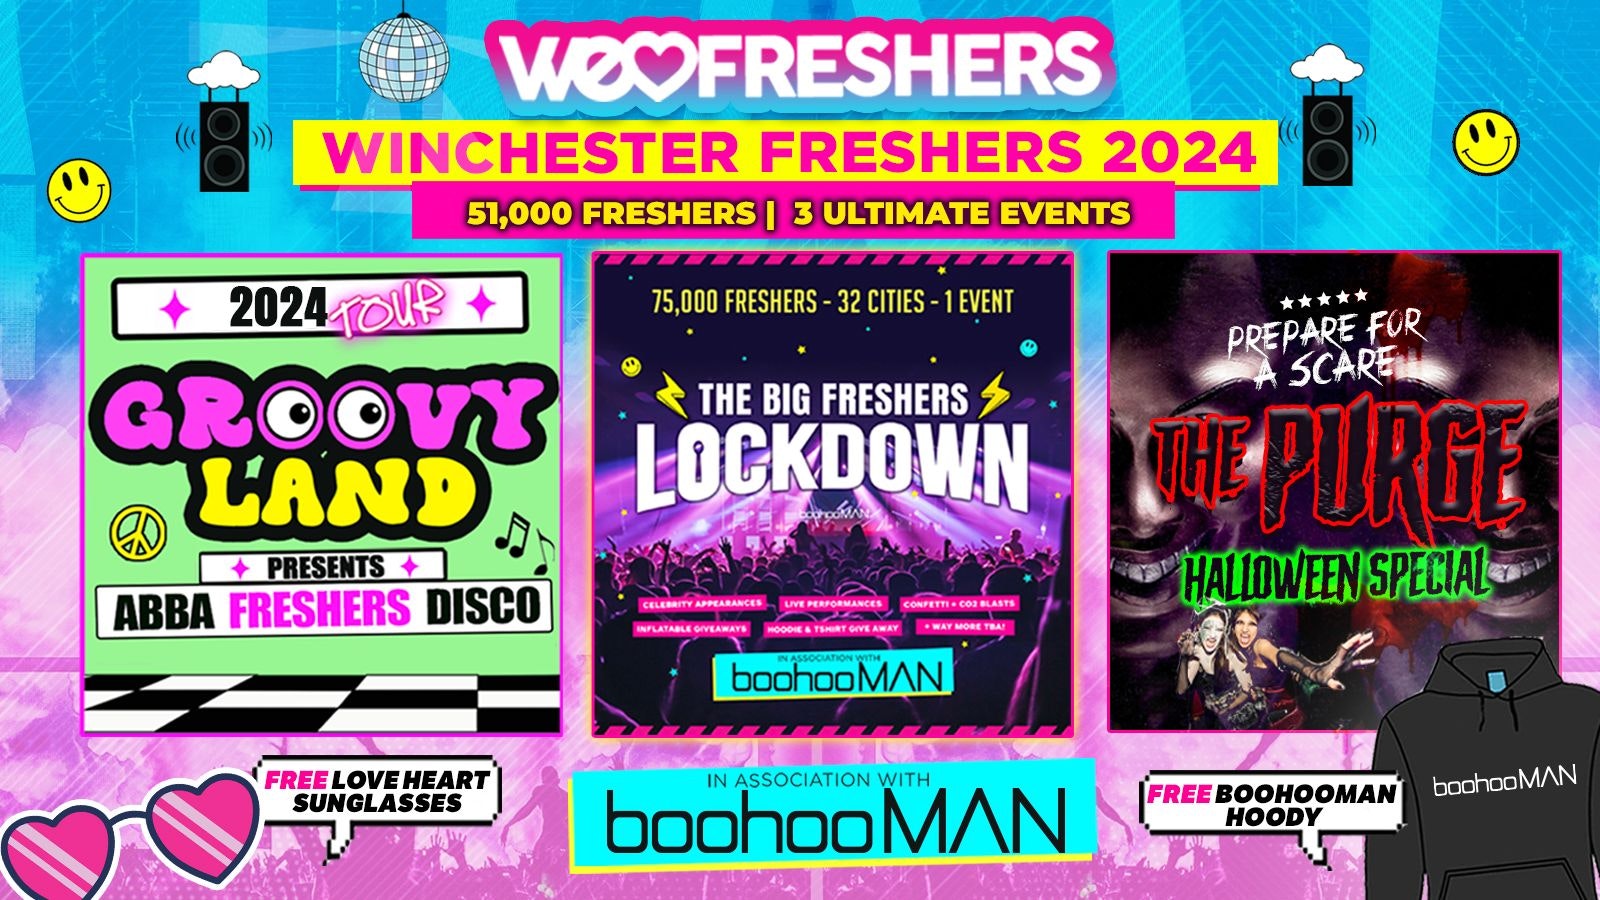 WE LOVE WINCHESTER FRESHERS 2024 in association with boohooMAN ❗3 EVENTS ❗